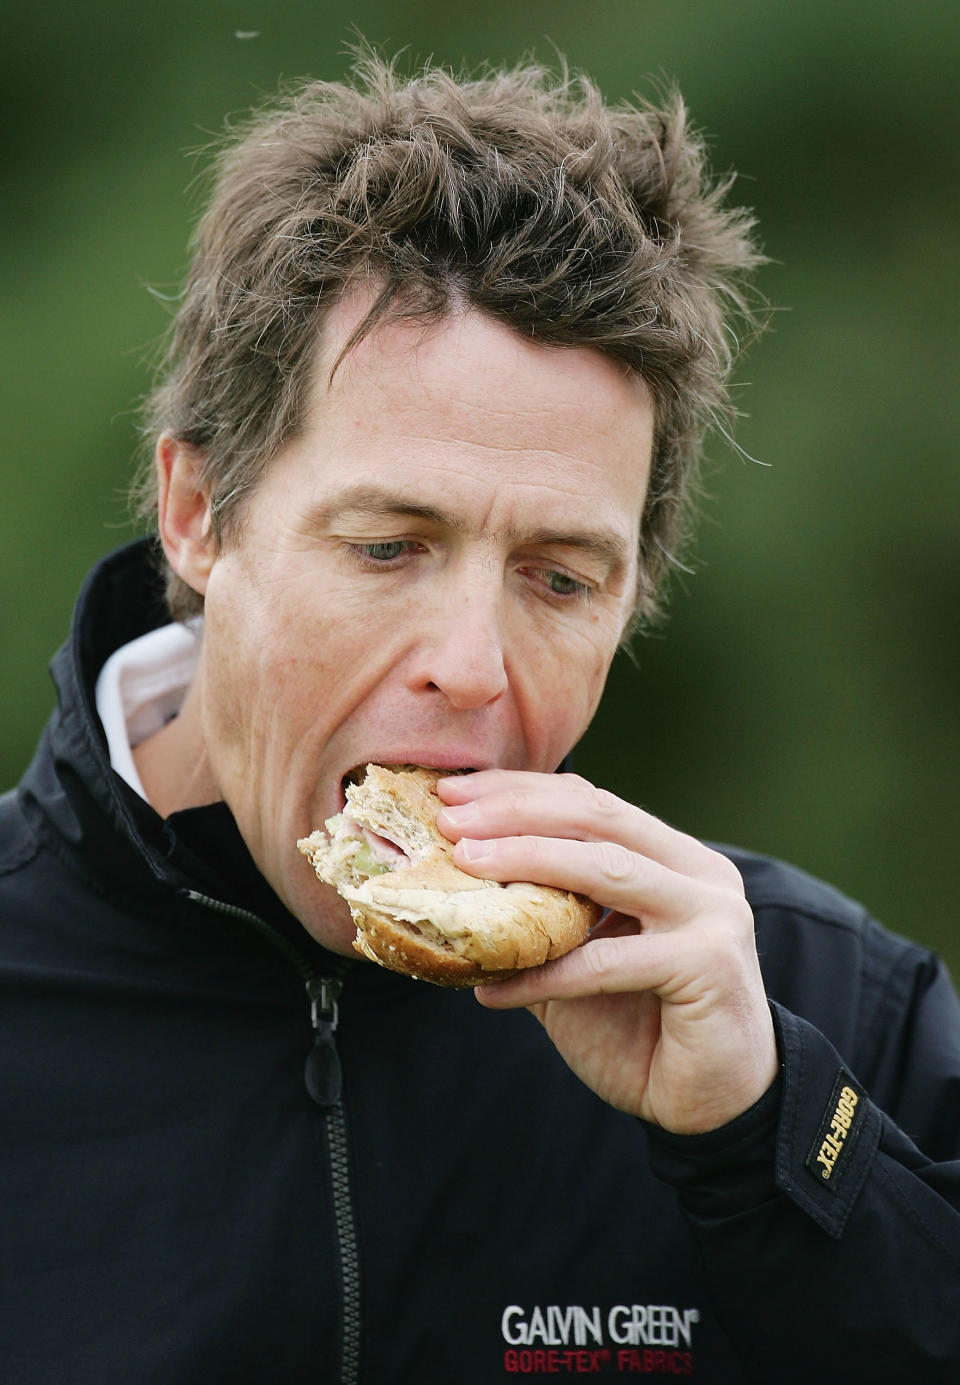 KINGSBARNS, SCOTLAND - OCTOBER 7:  Actor Hugh Grant eats a sandwich after the 9th hole during the first round of the Dunhill Links Championship at the Kingsbarns Golf Club on October 7, 2004 in Kingsbarns, Scotland.  (Photo by Ross Kinnaird/Getty Images)